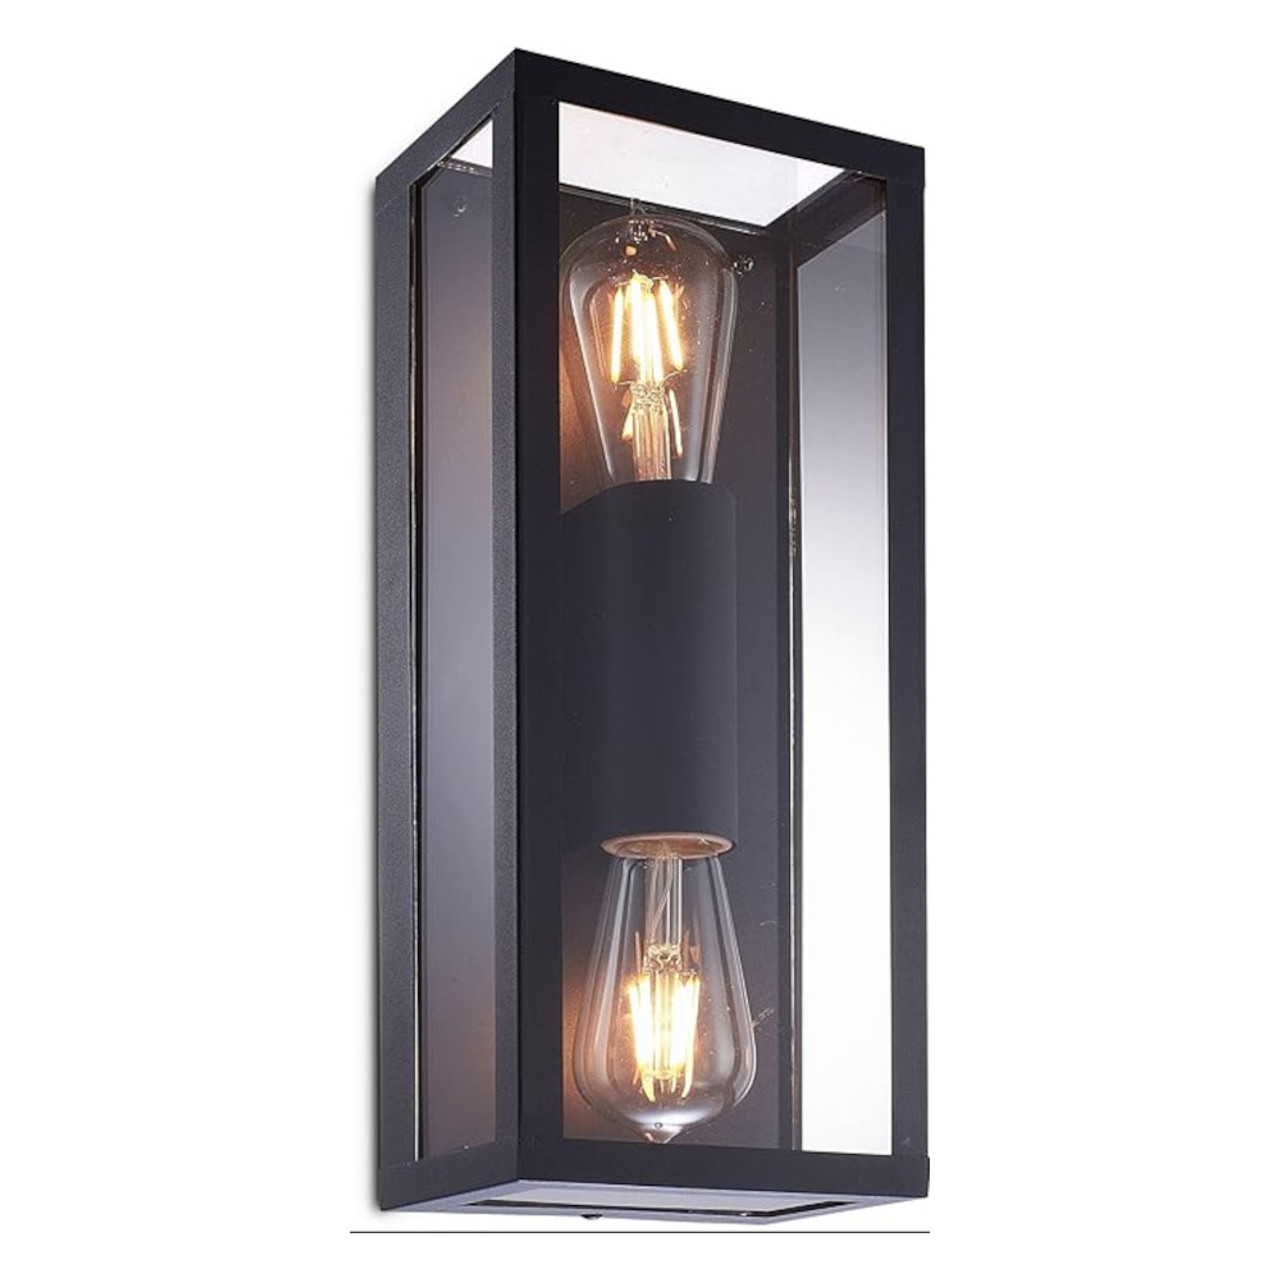 Decorative Boxed Up/Down Wall Lantern Black IP44 (no lamp included)